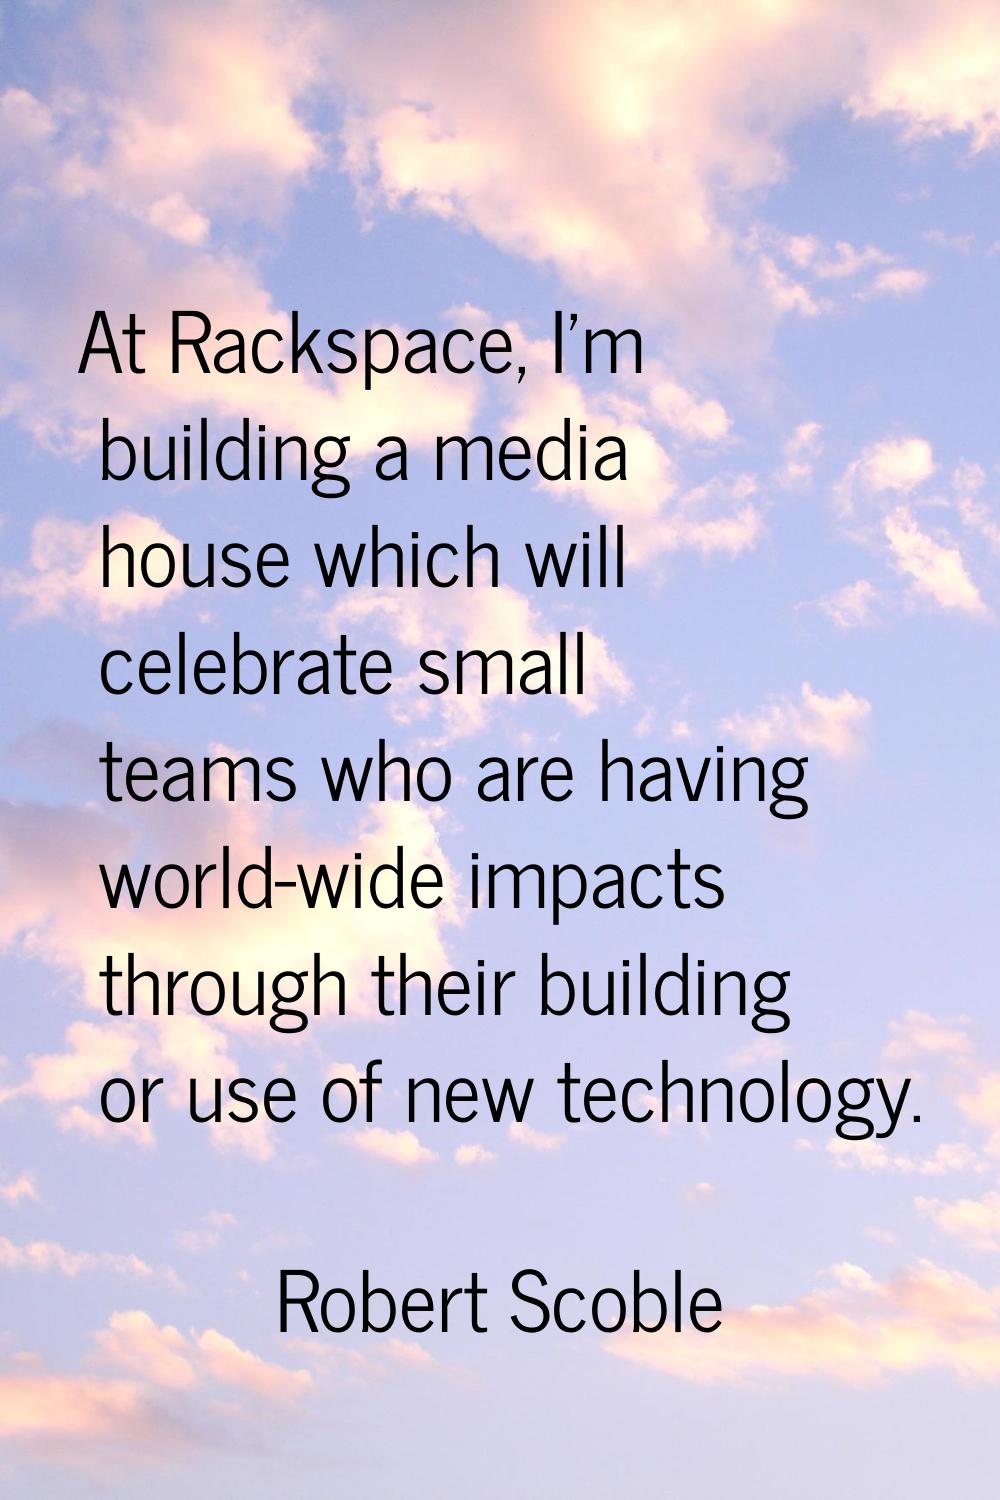 At Rackspace, I'm building a media house which will celebrate small teams who are having world-wide